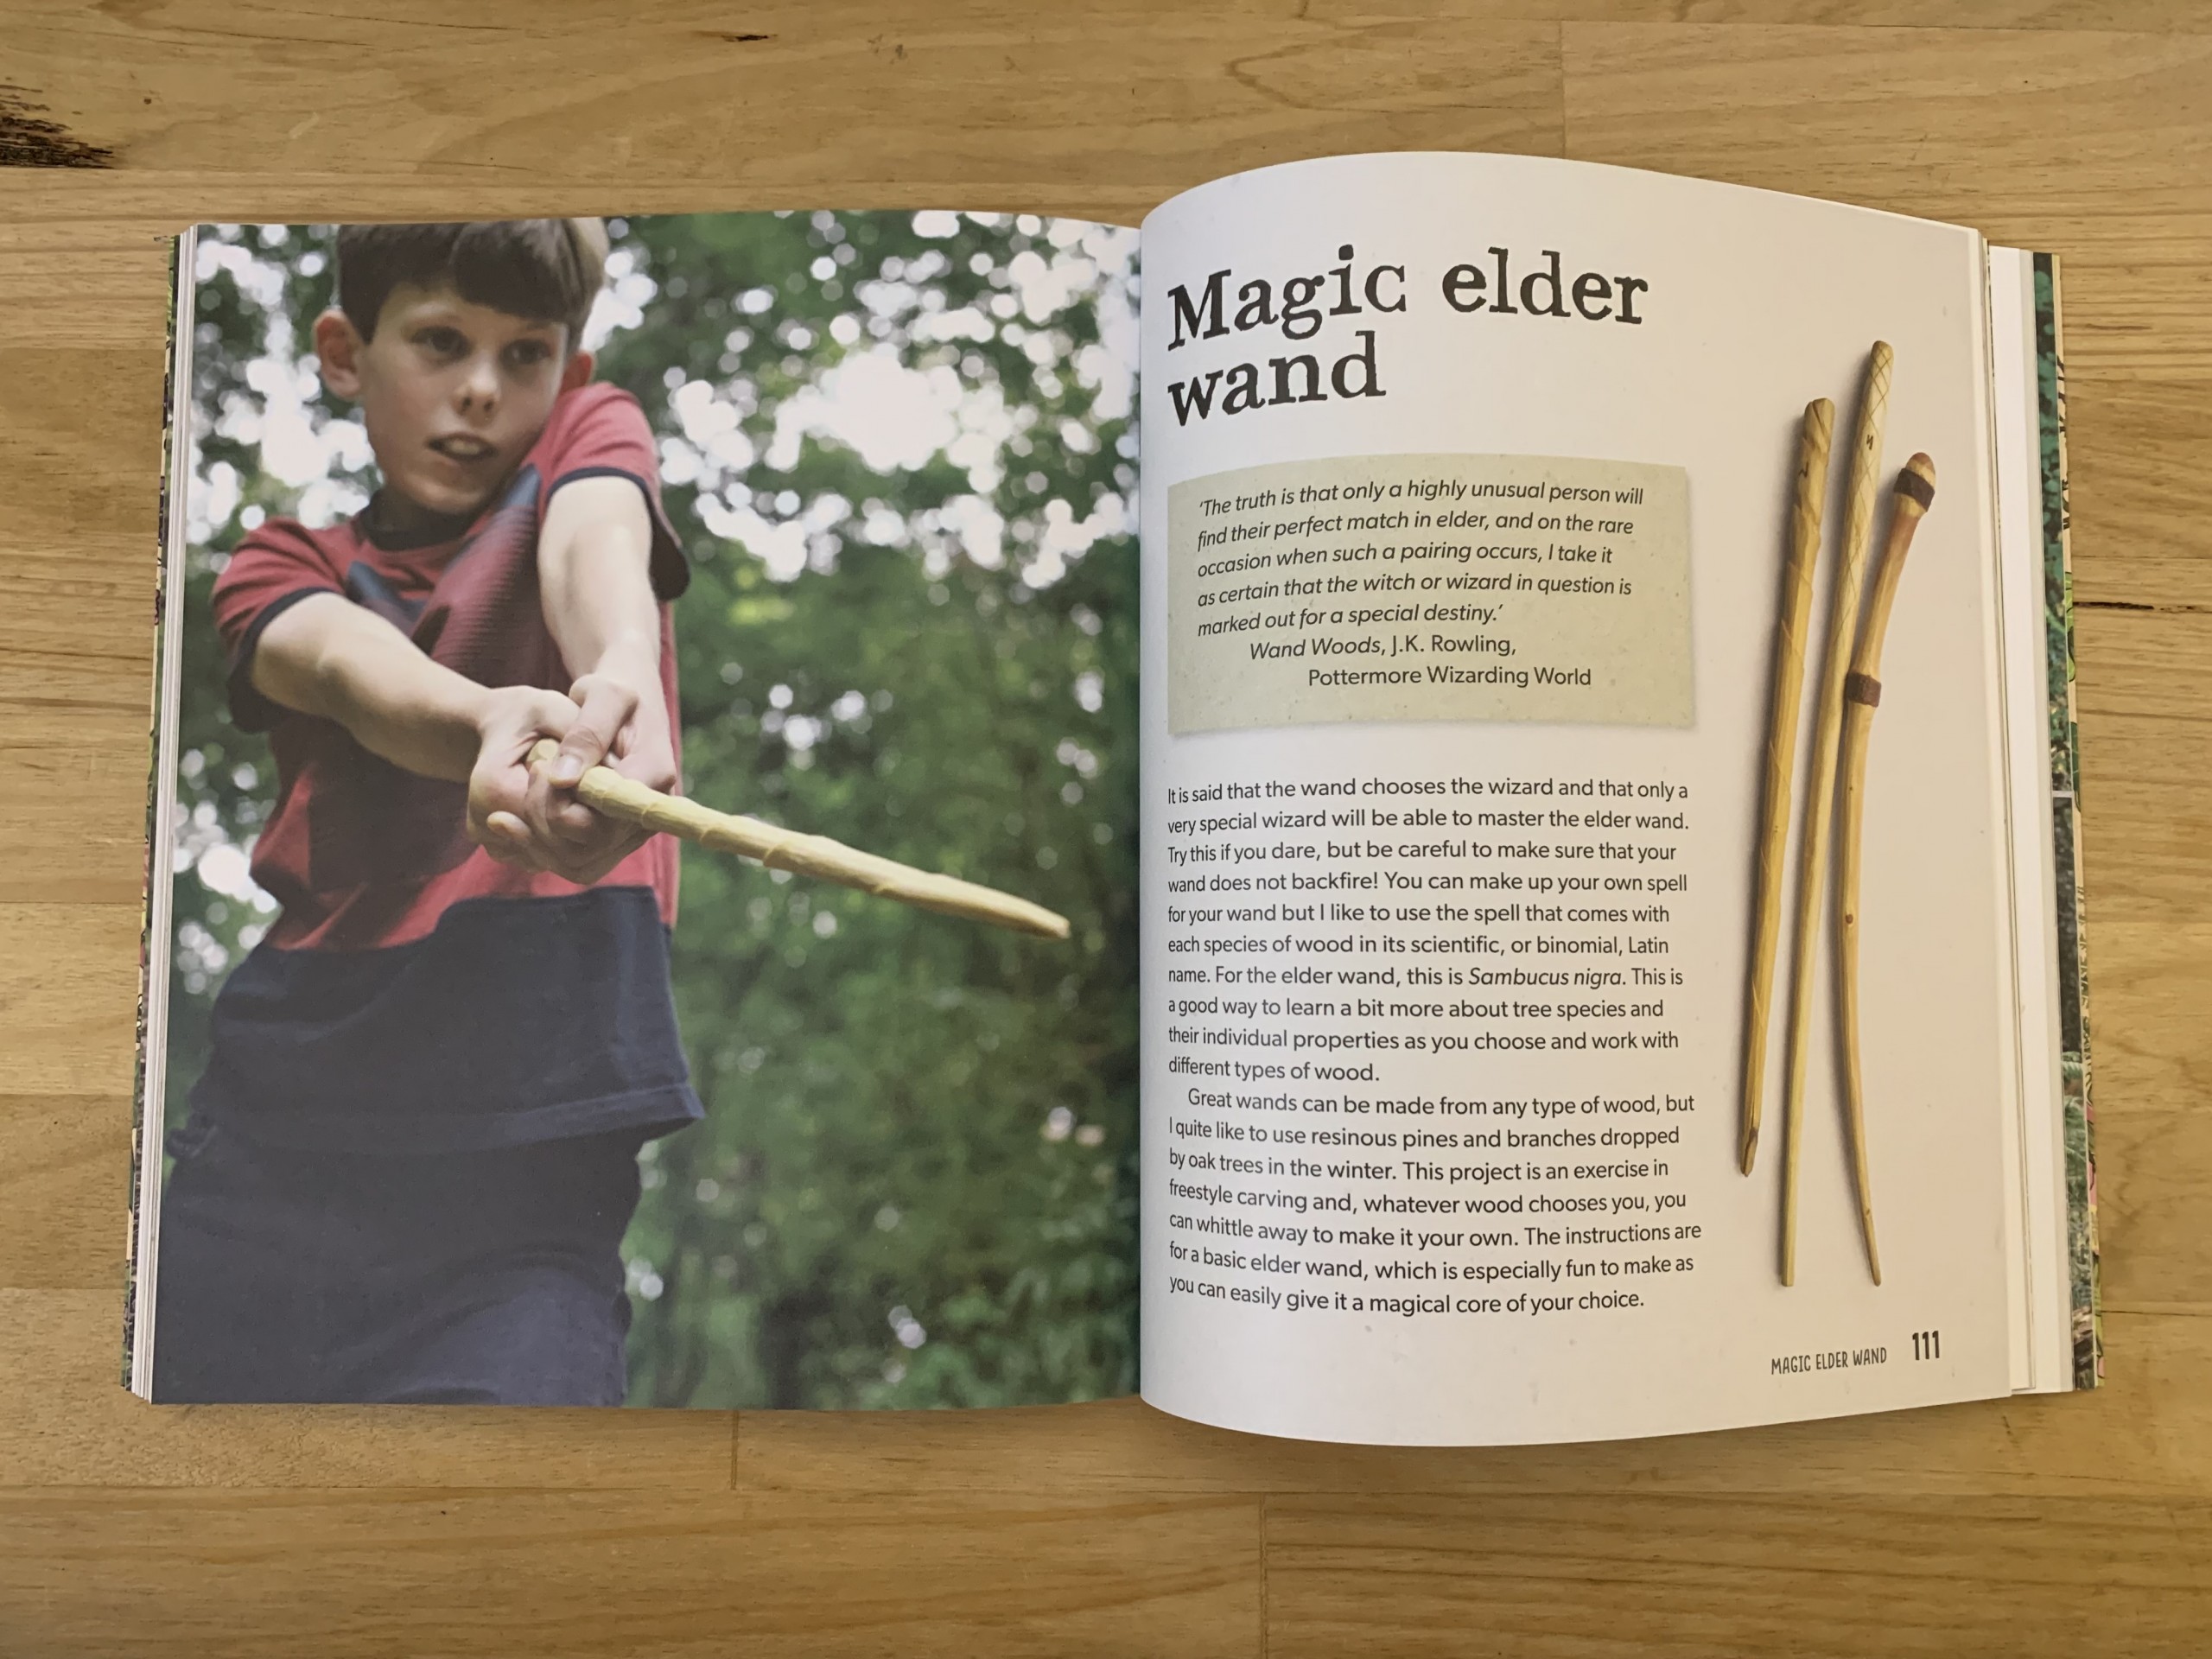 Woodland Whittling Book